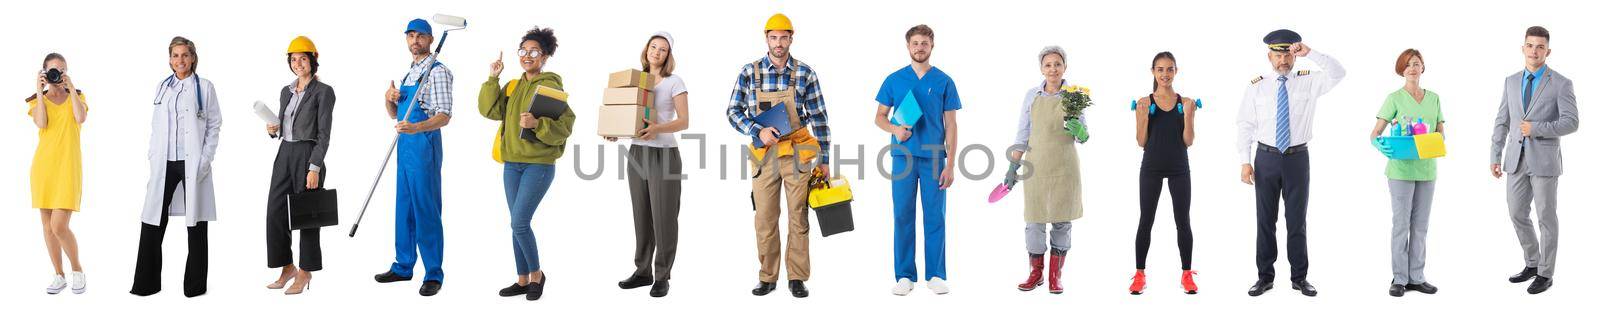 Group of professional workers of different professions isolated on white background, full length portraits, design element